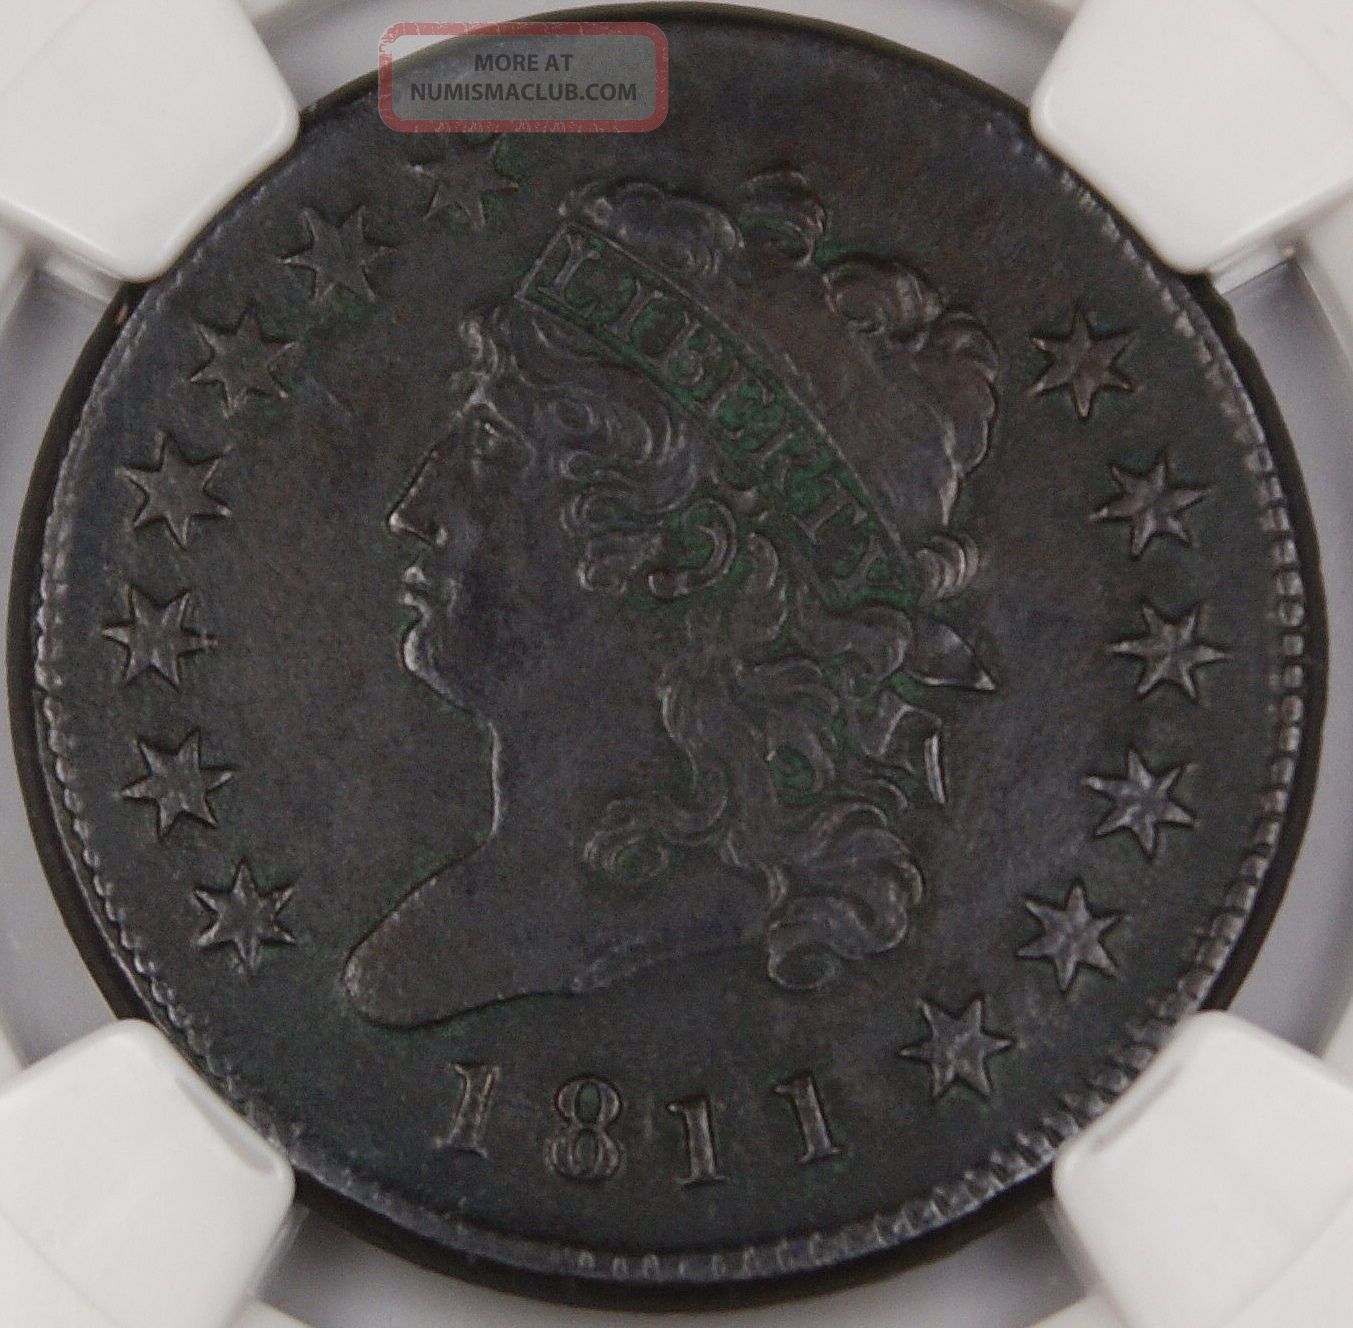 1811 Classic Head Large Cent, Ngc Xf Details S - 287, Environmental Damage